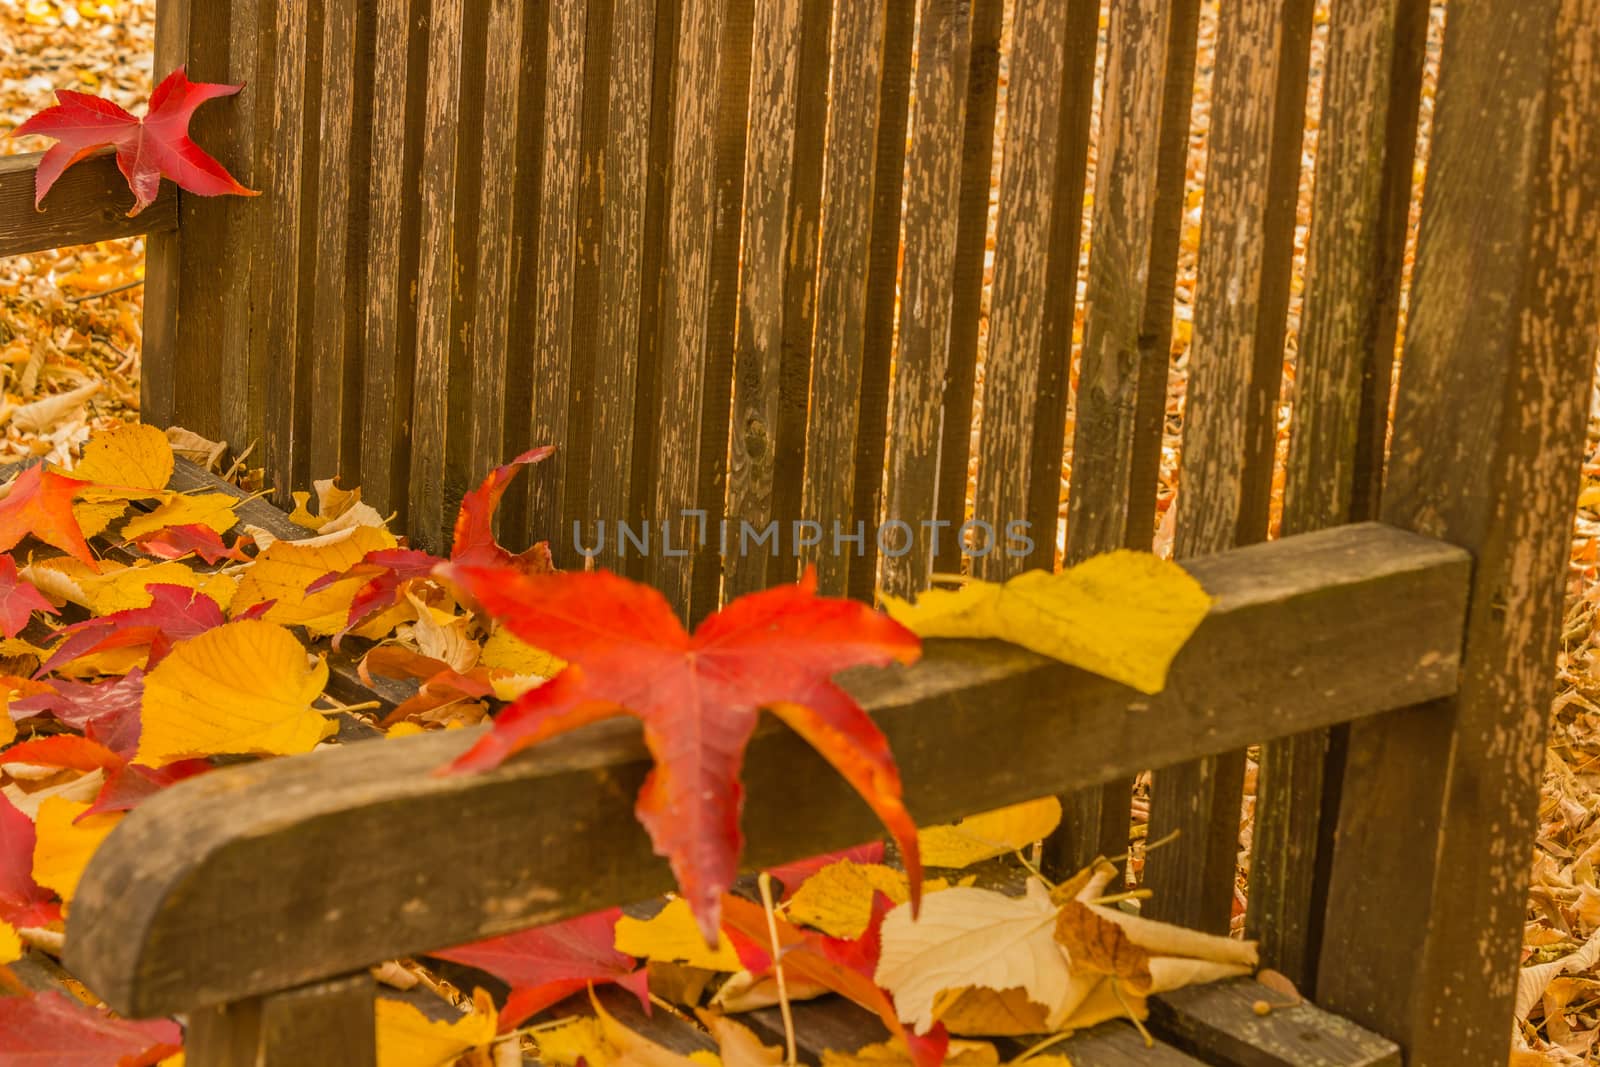 the seat of a bench covered with colored leaves fallen from the trees